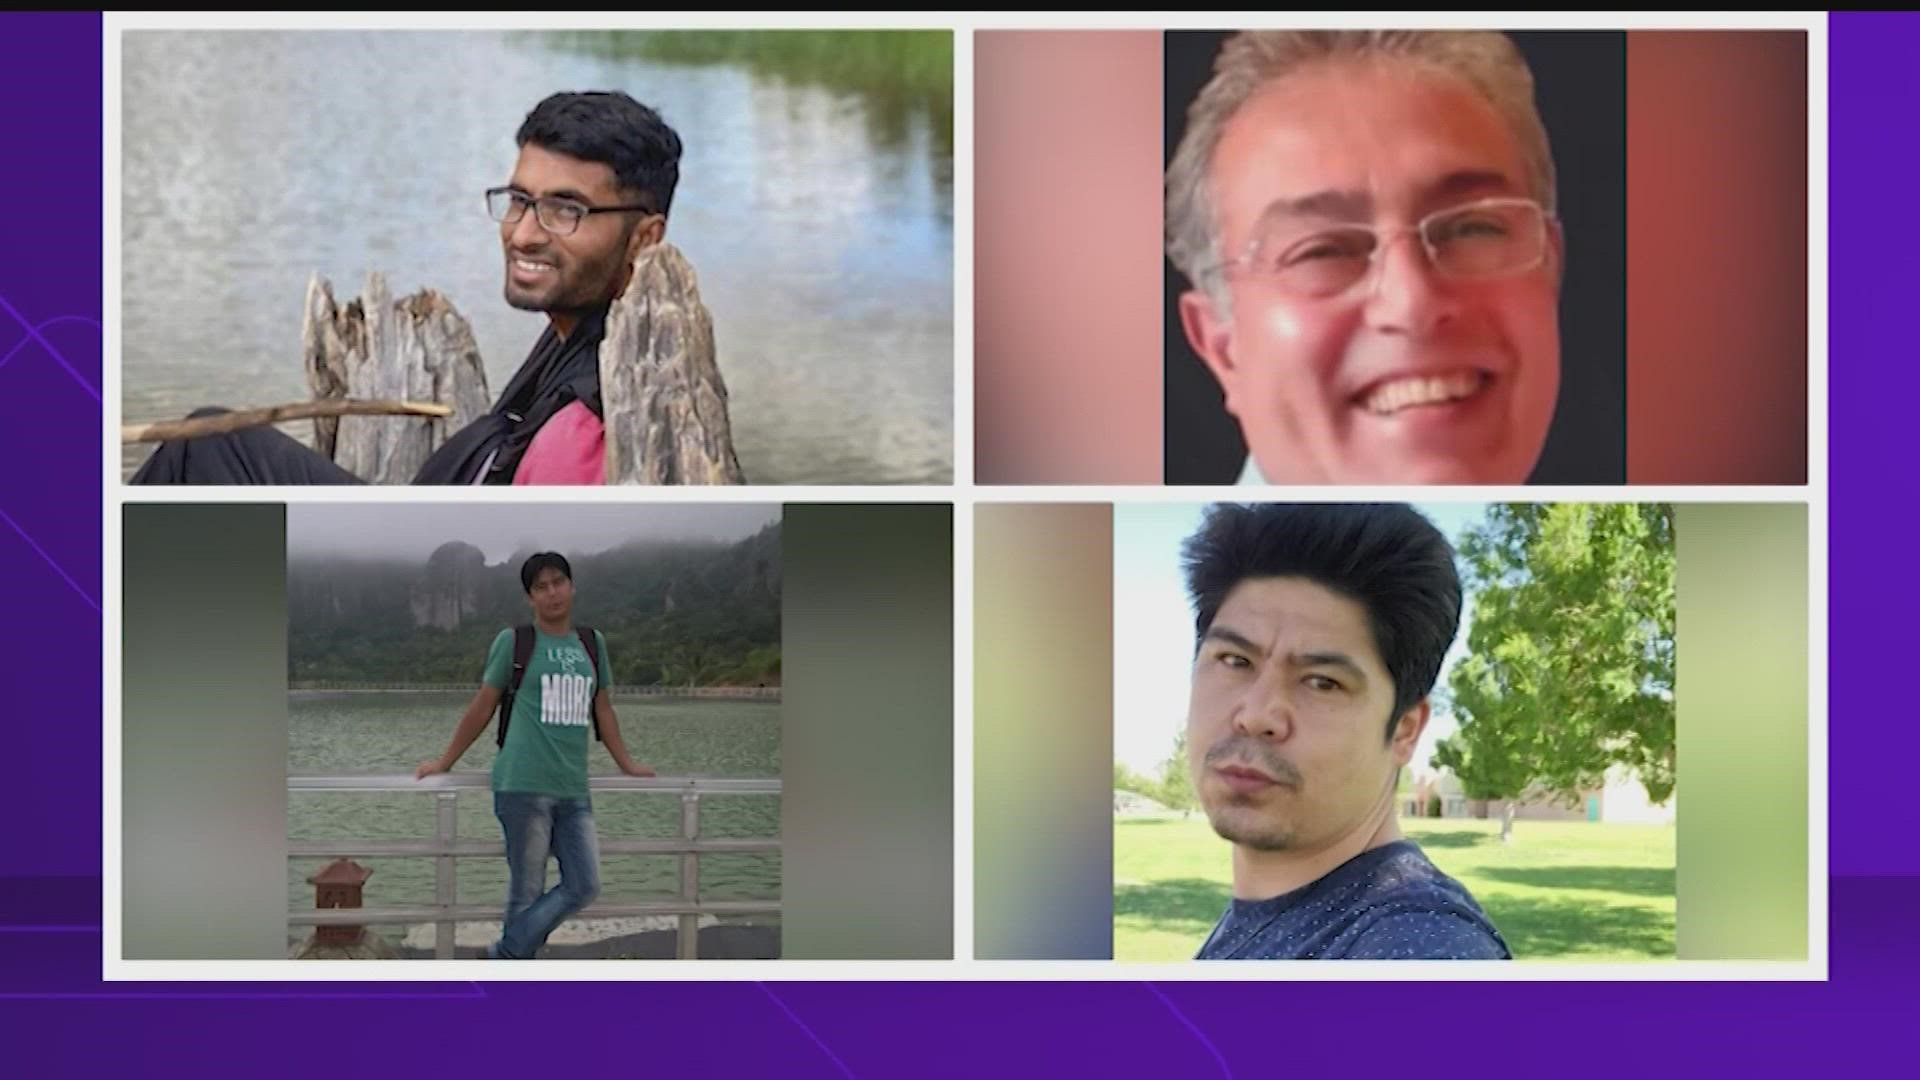 The Muslim community in Houston is speaking out about the murders of four Muslim men in New Mexico.